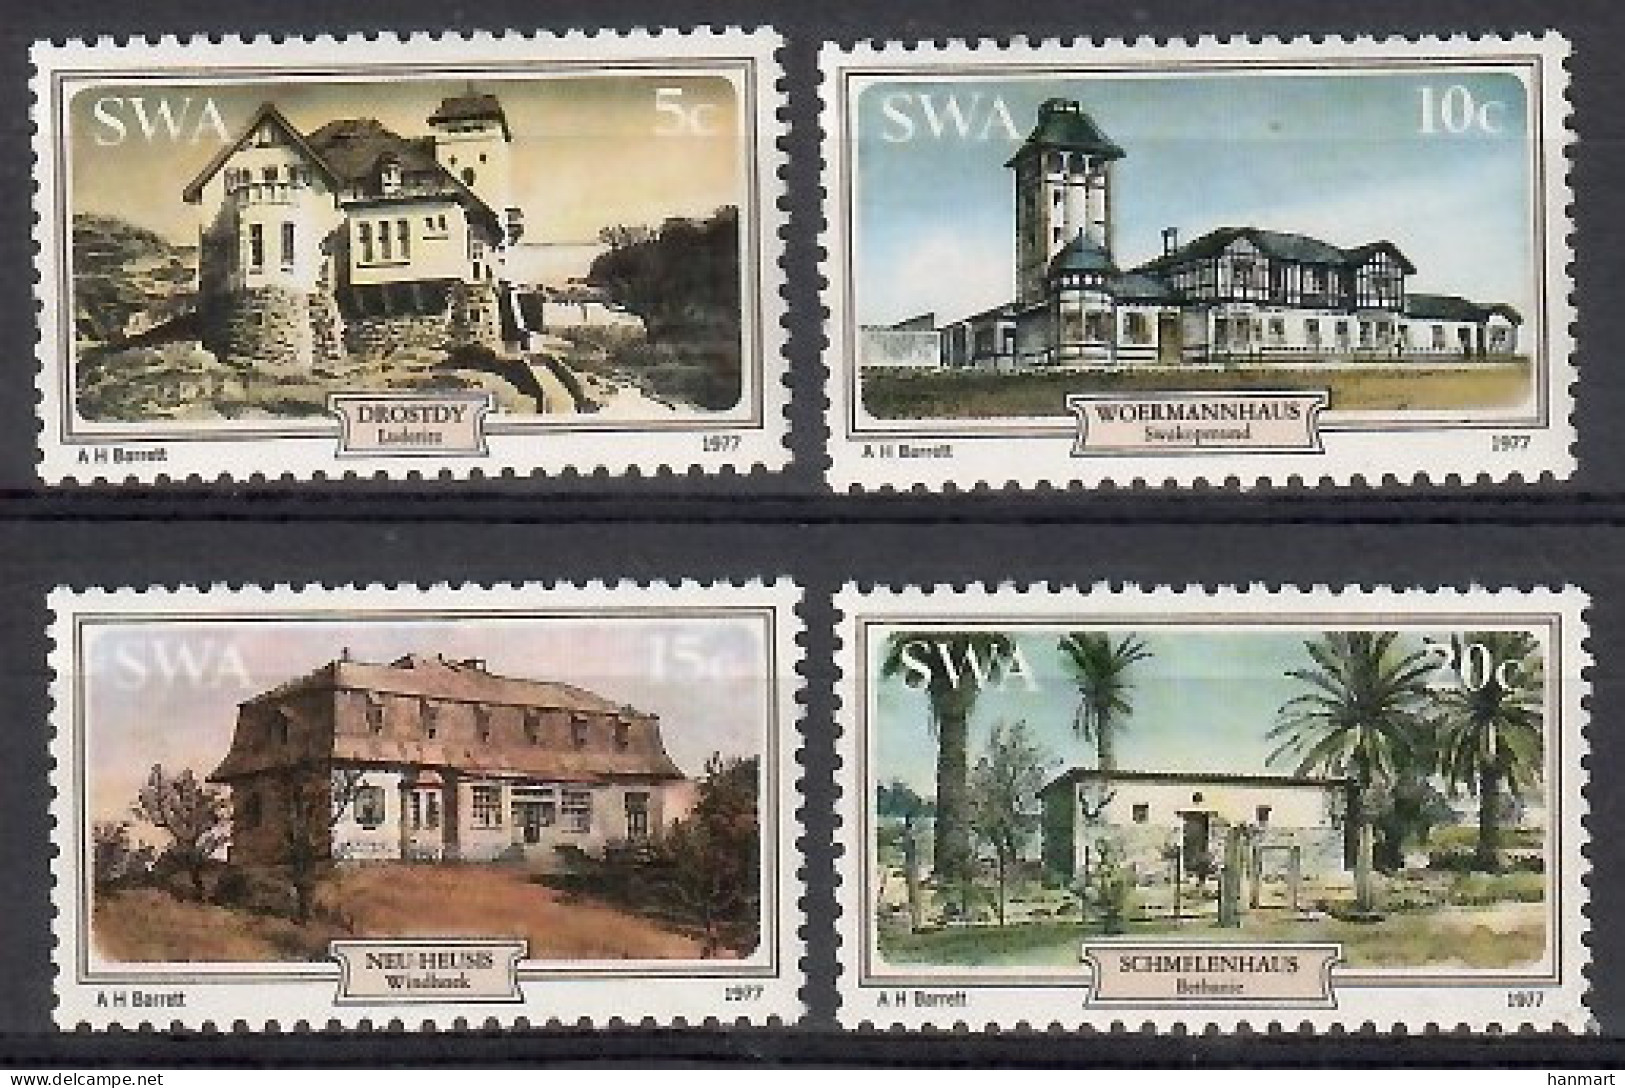 South-West Africa 1977 Mi 436-439 MNH  (ZS6 NMB436-439) - Andere